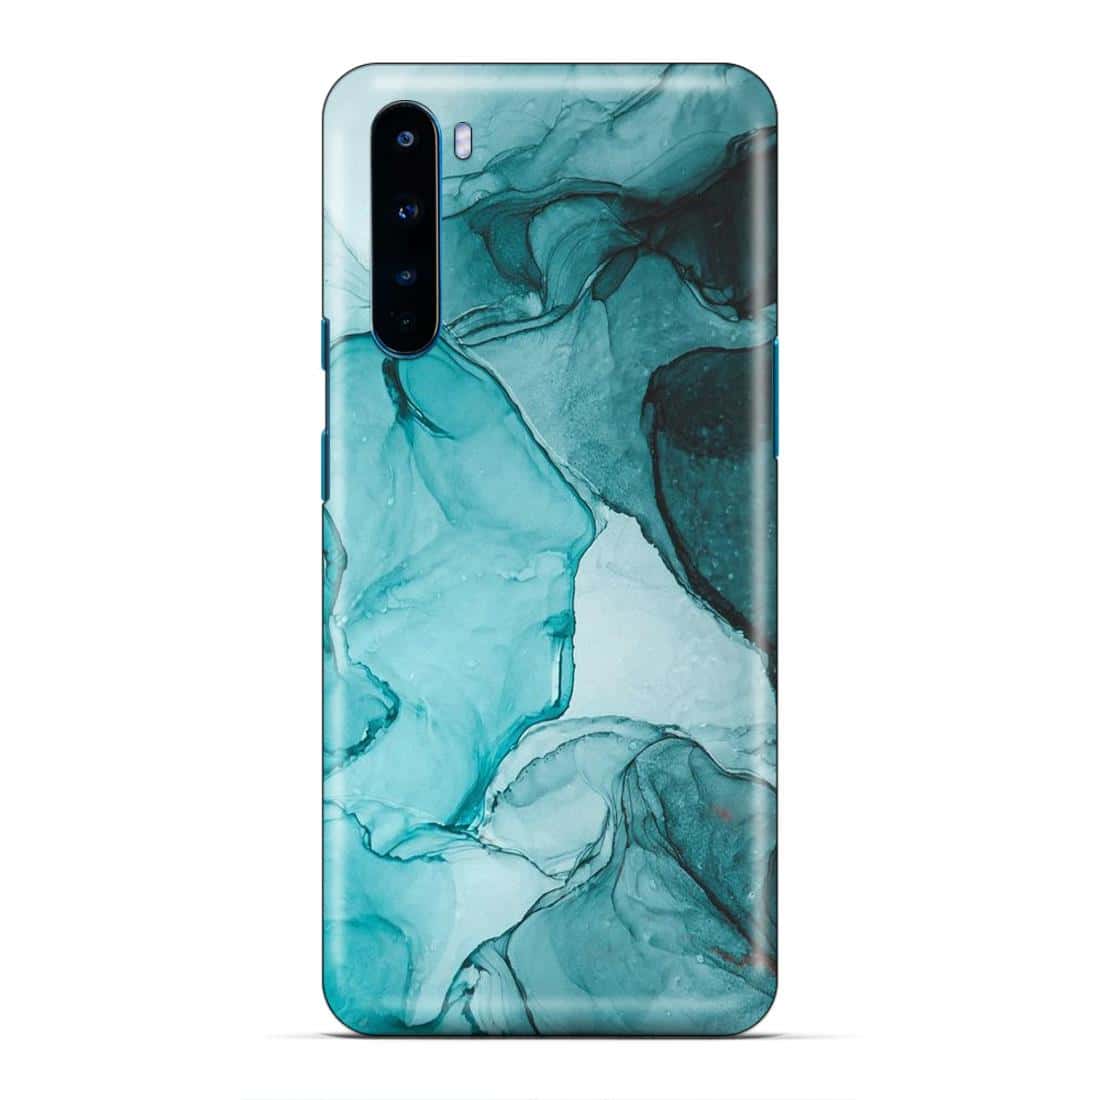 Beat The Blue Oneplus Nord Mobile Phone Cover Stayclassy In